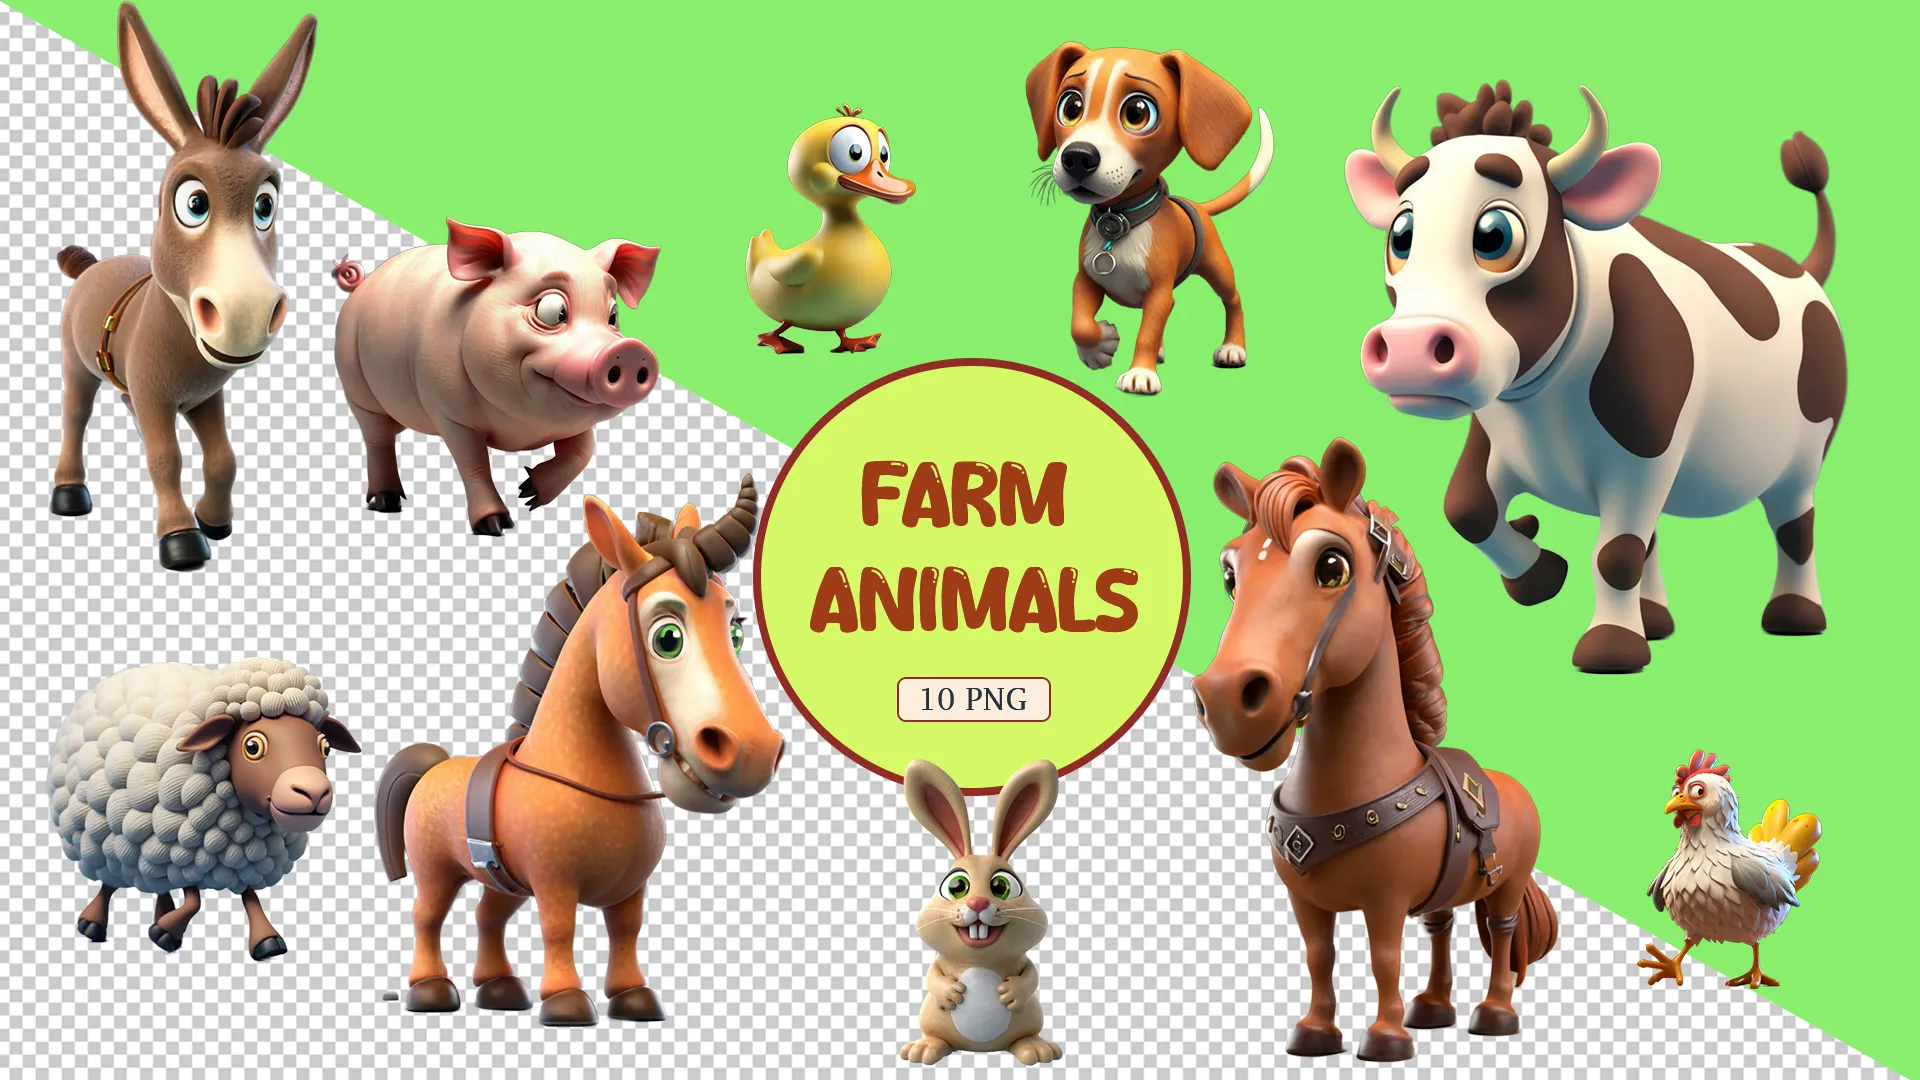 Cute and Colorful Farm Animals Set Pack